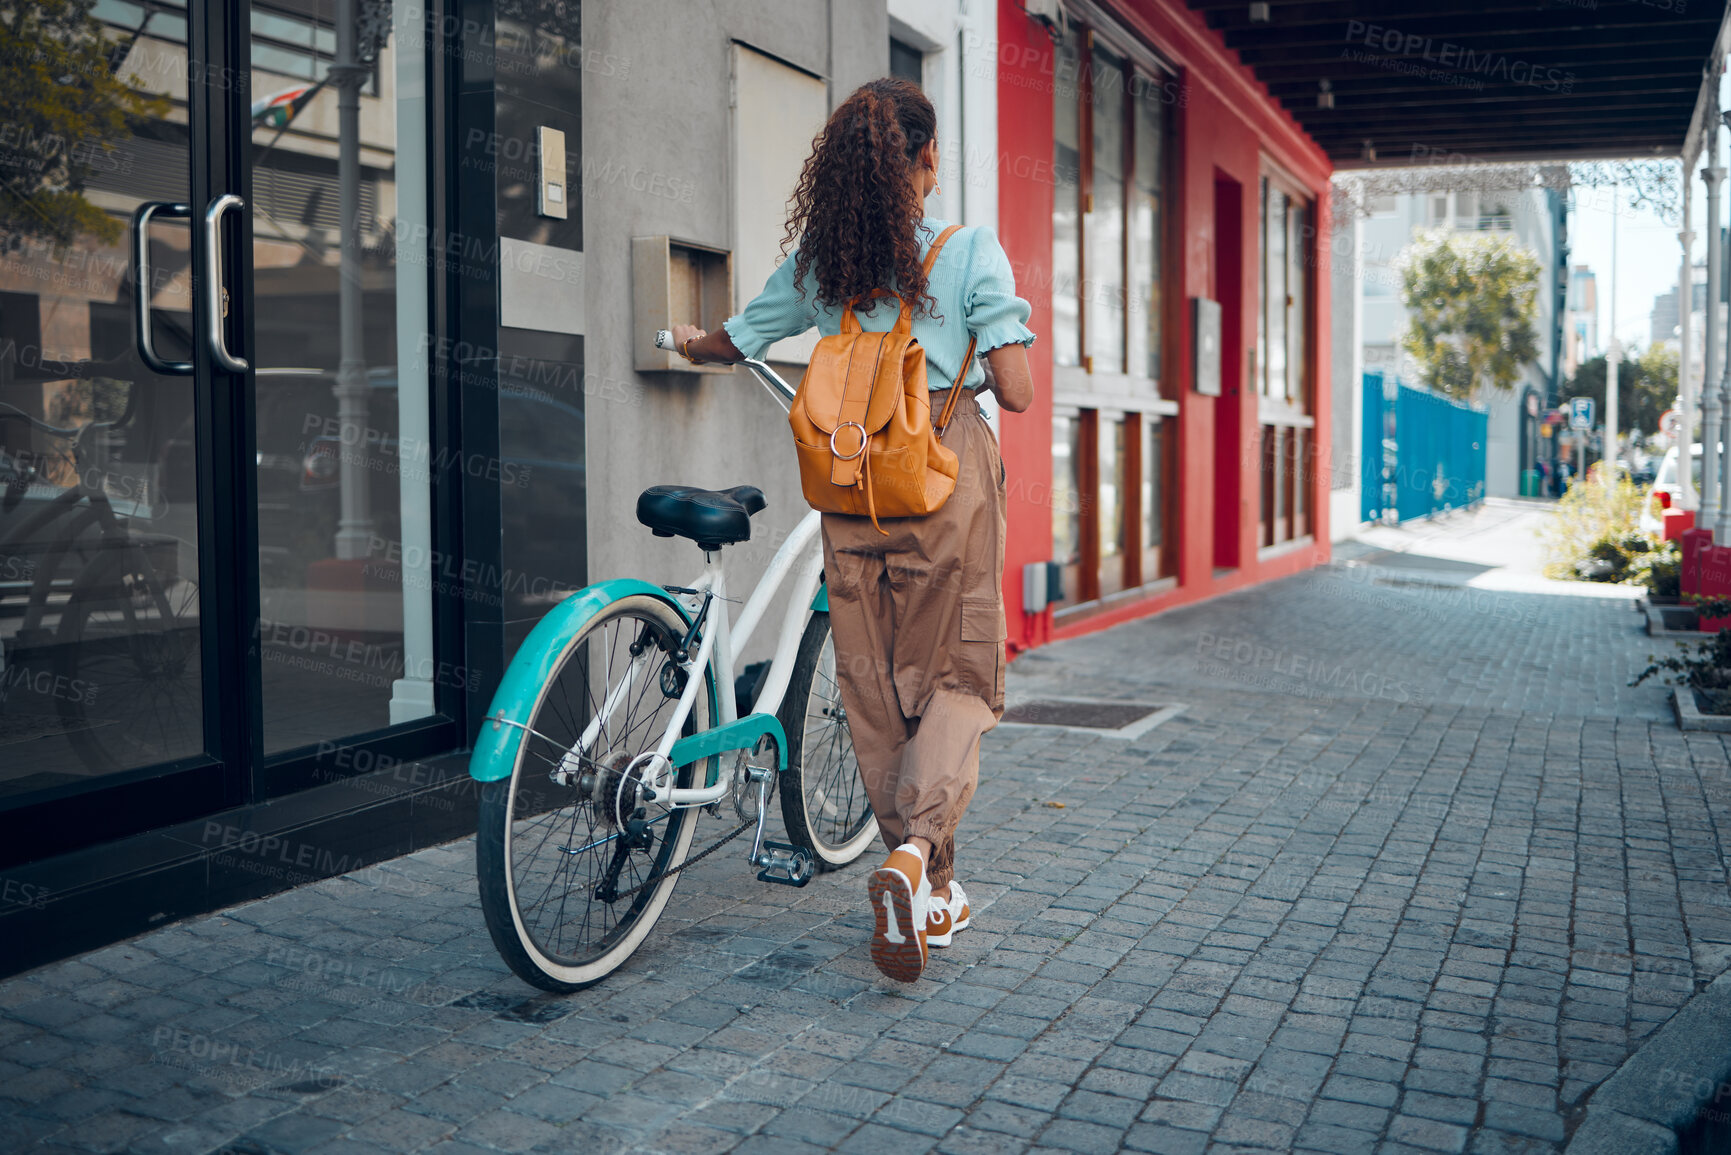 Buy stock photo Bike, city and back view of black woman, walking on street or urban road outdoors. Exercise, fitness and female student on bicycle ride, eco friendly transportation and cycling on asphalt in town.
